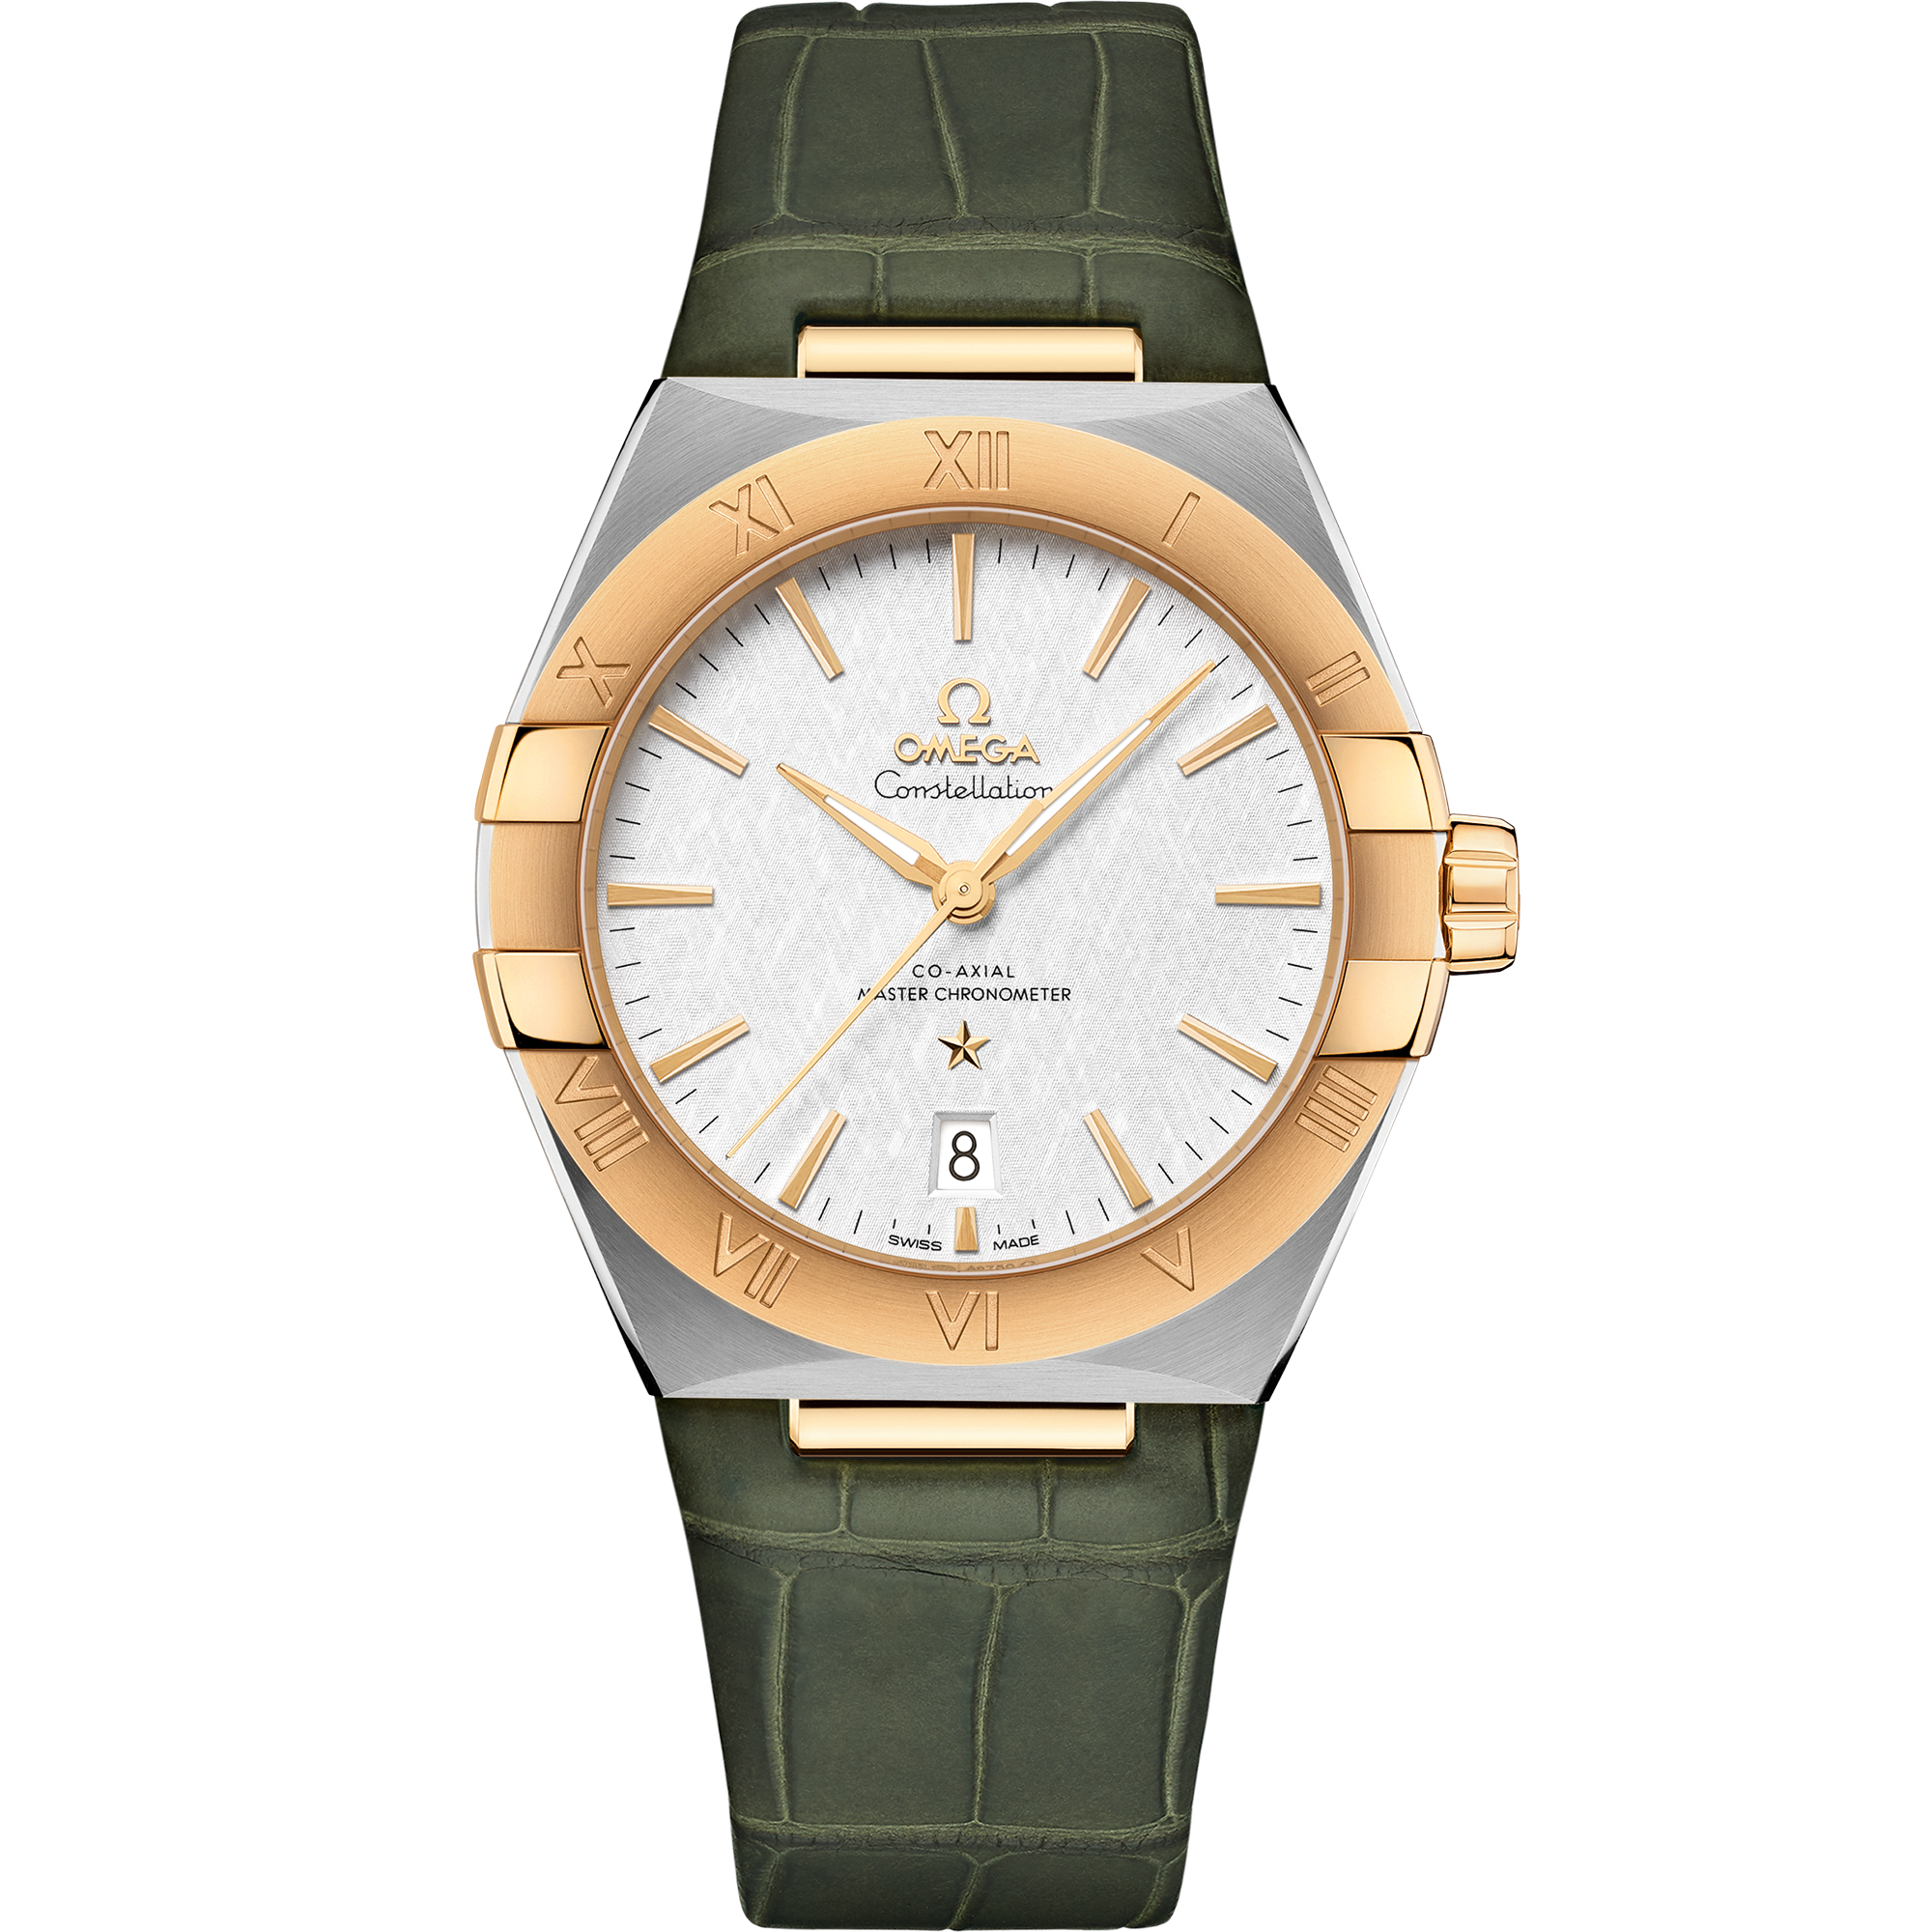 Constellation 39 mm, steel - yellow gold on leather strap - 131.23.39.20.02.002